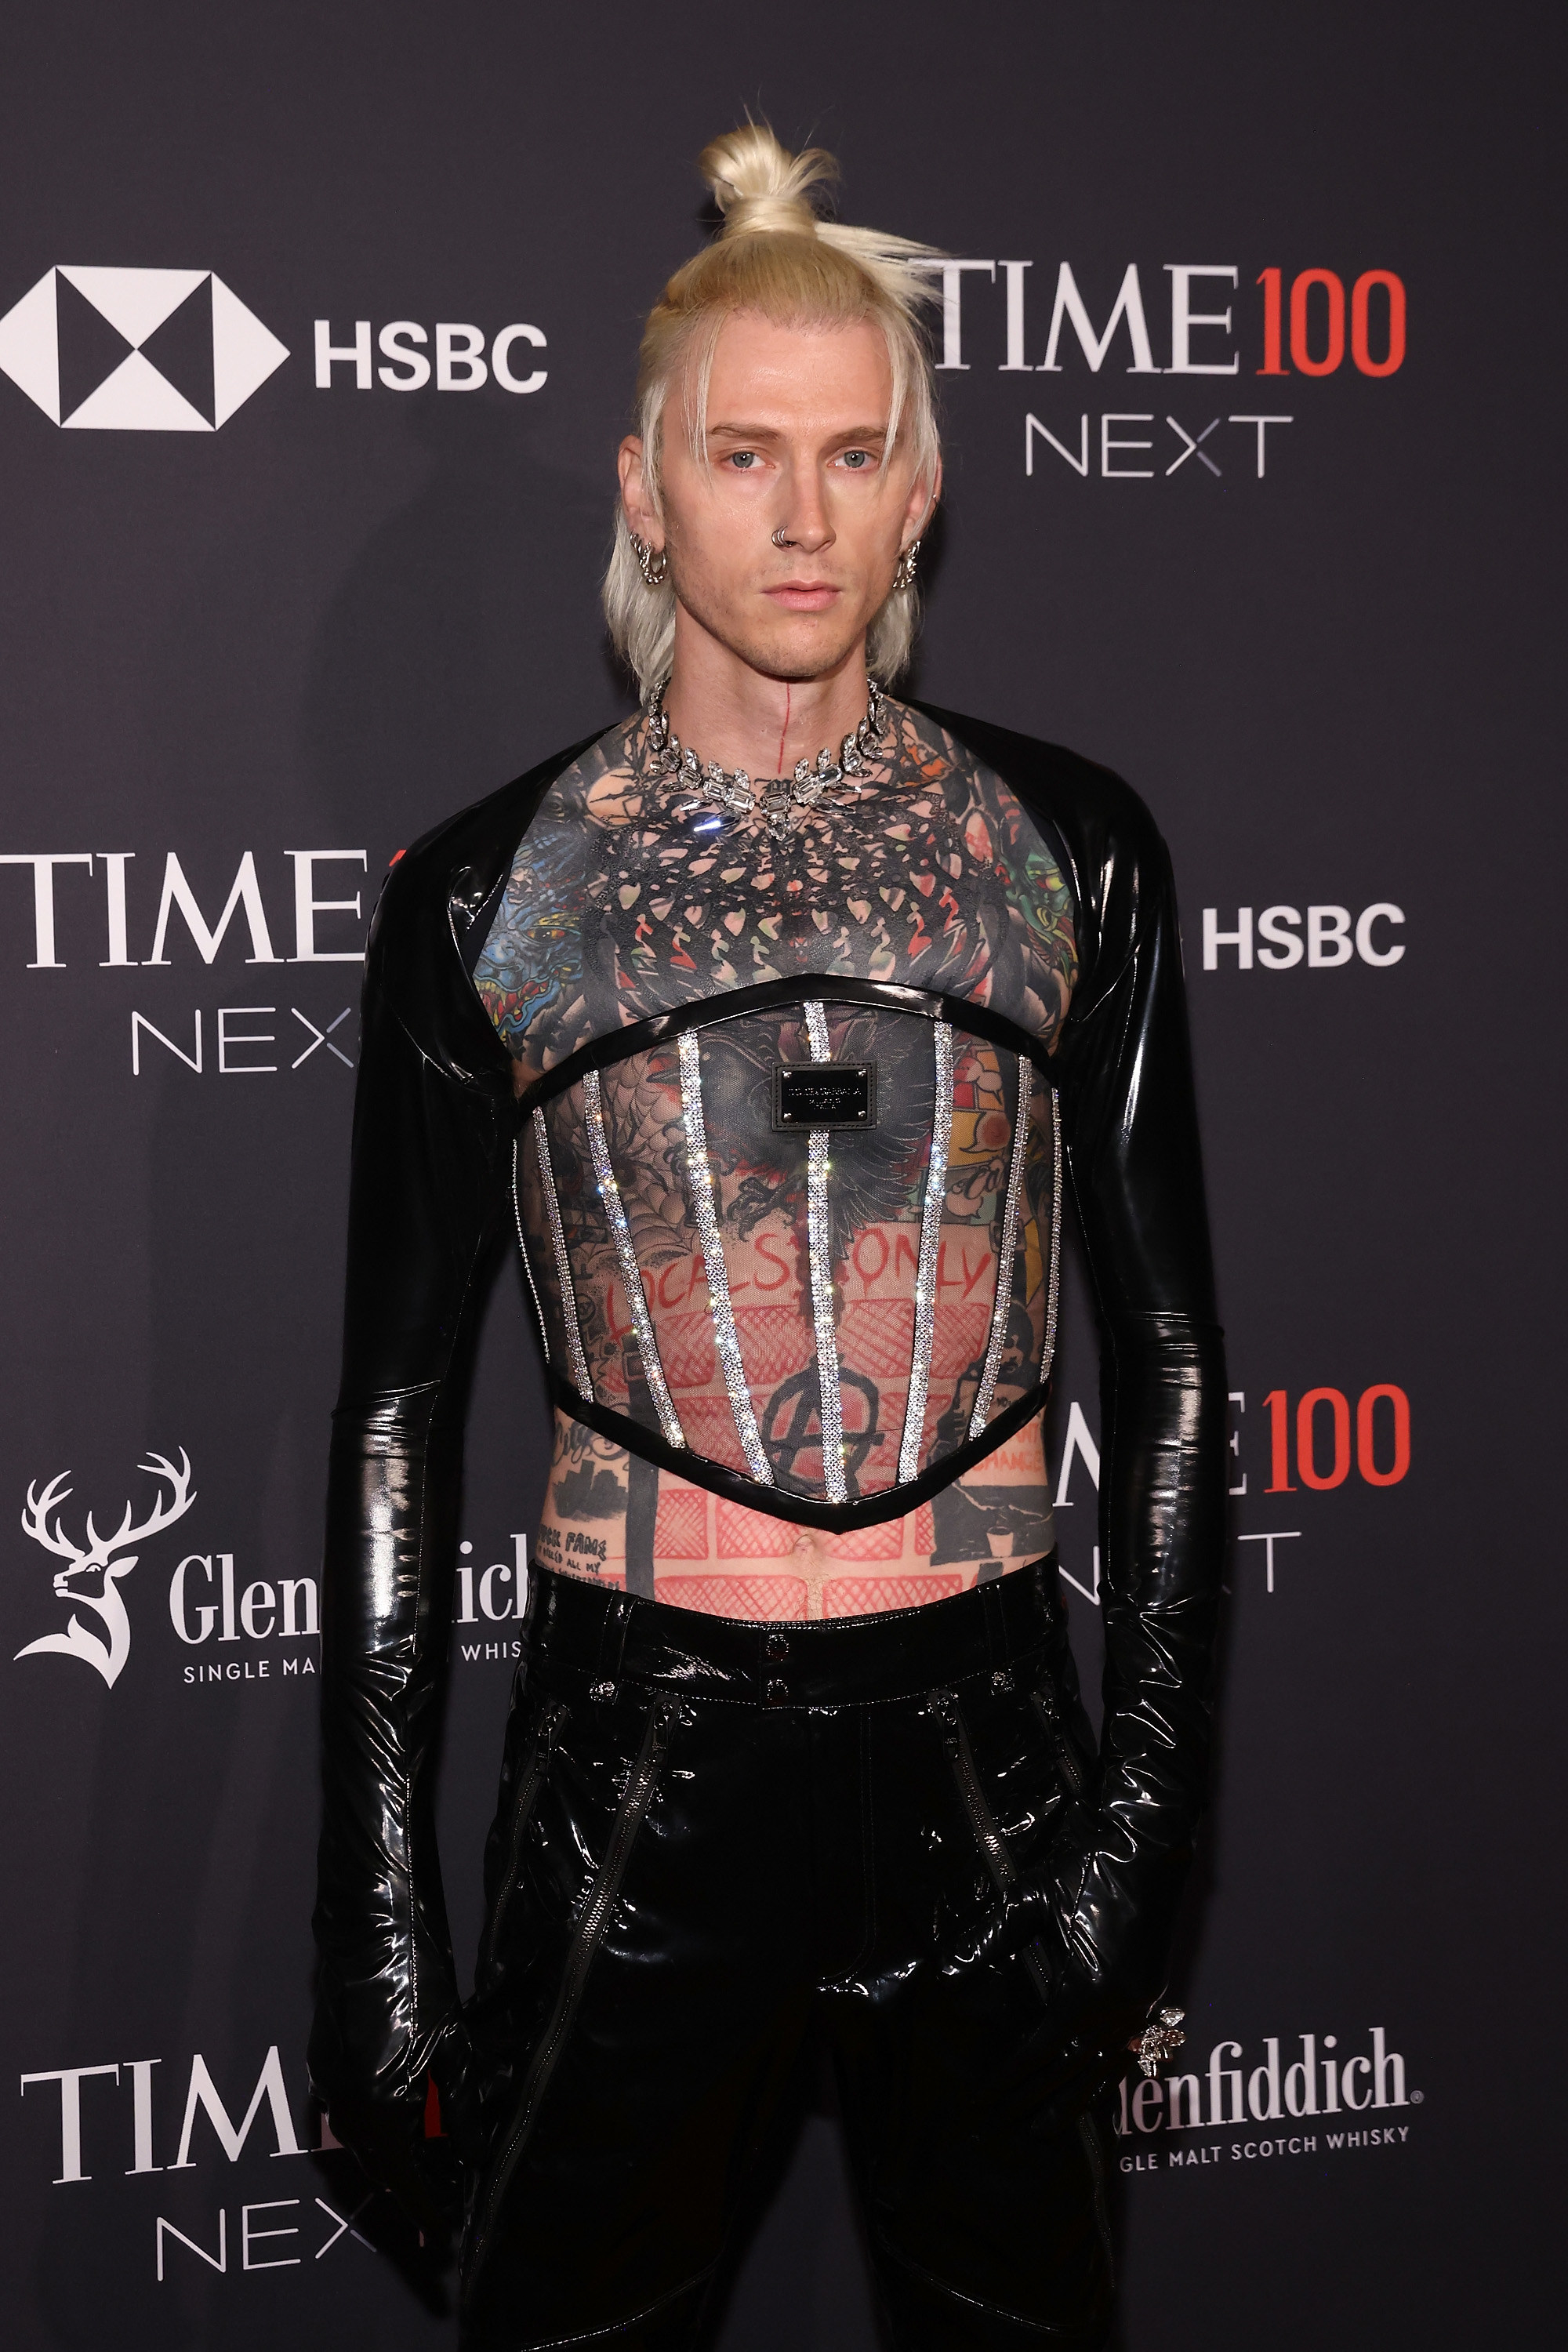 MGK at the Time gala with the top knot